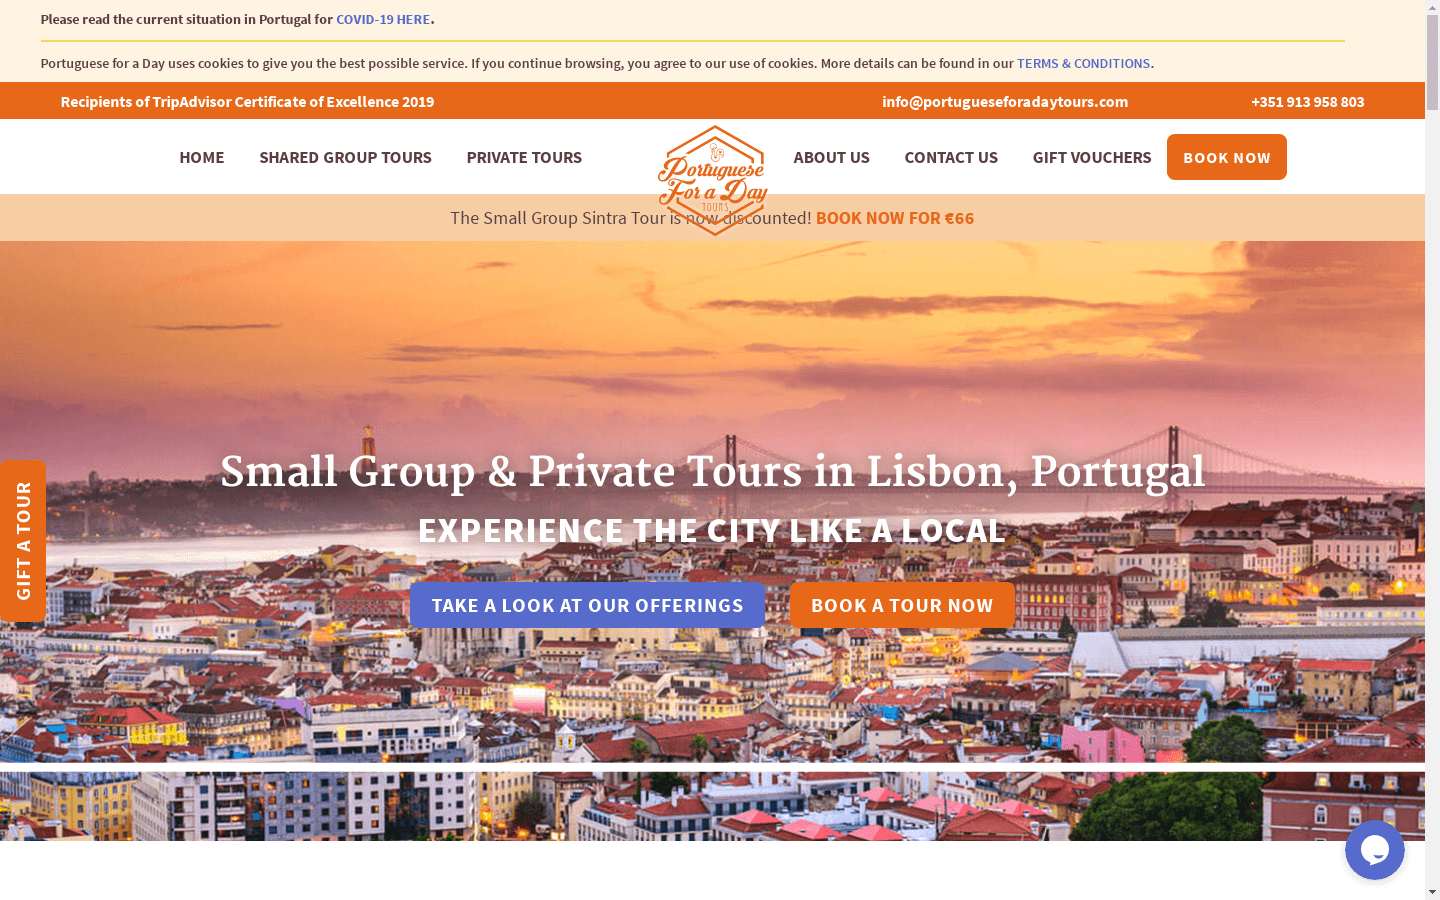 Small Group & Private Tours in Lisbon Portuguese For a Day